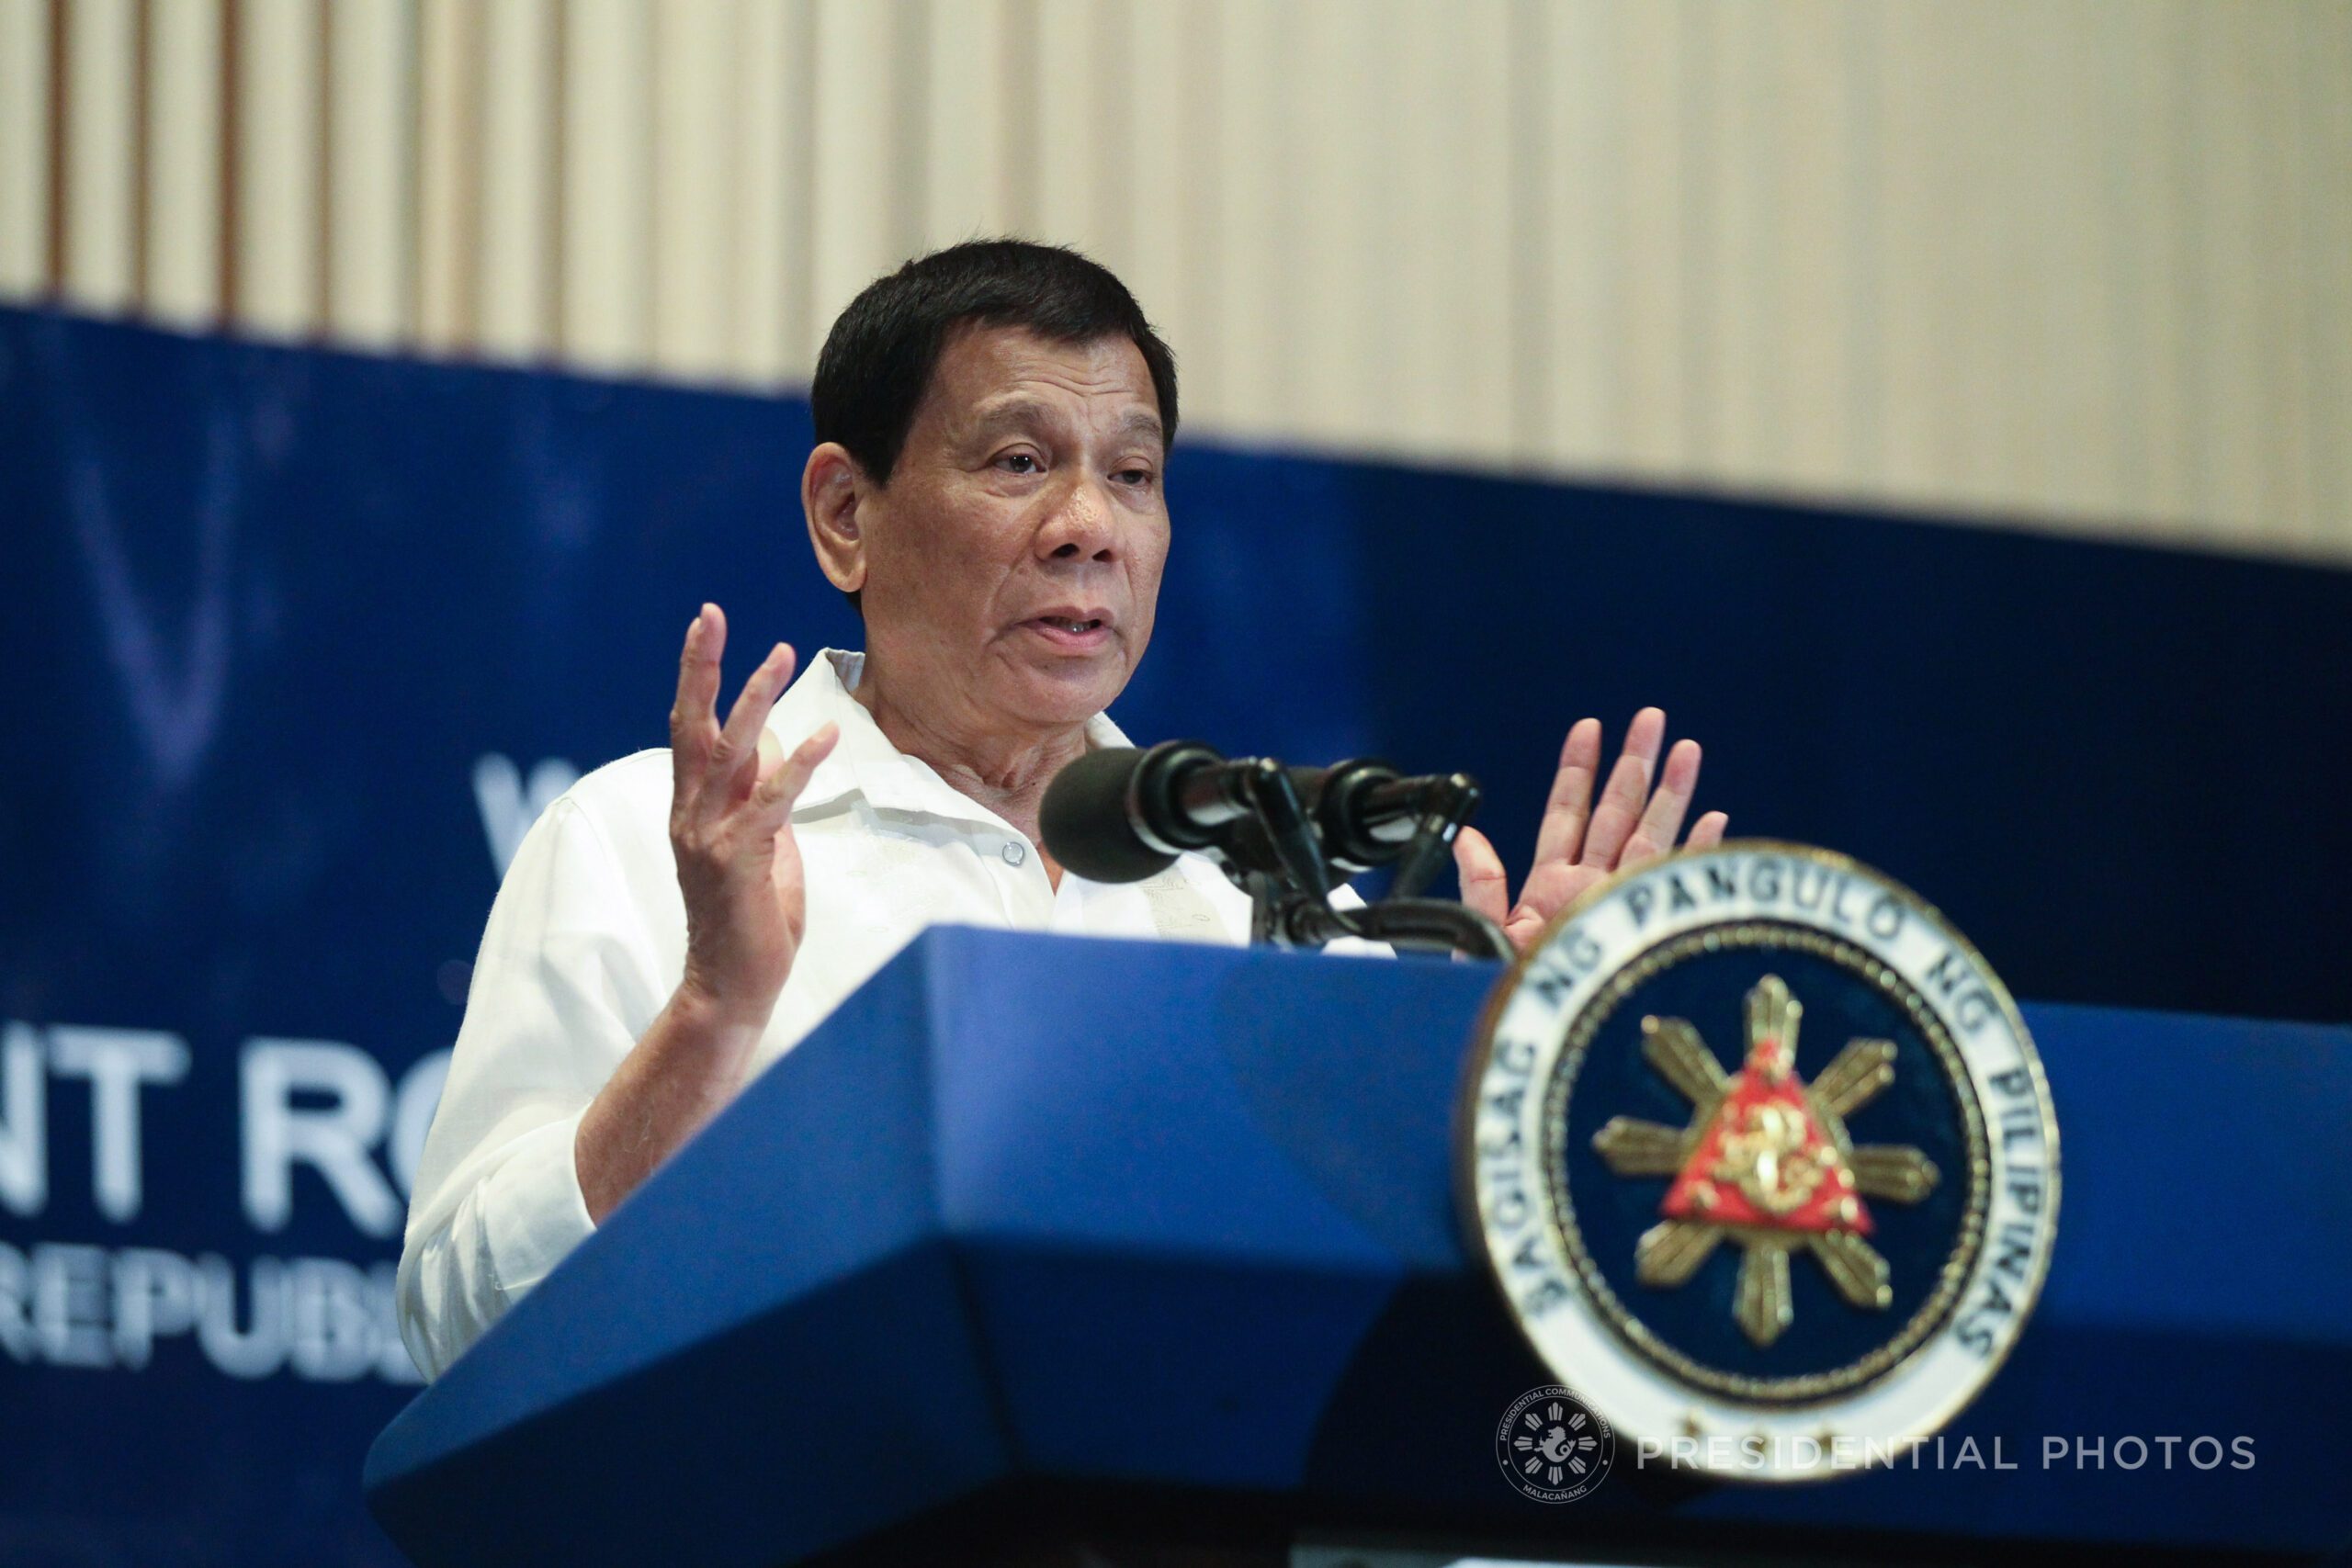 On FOI EO anniv, Duterte calls on Congress, courts to be more transparent